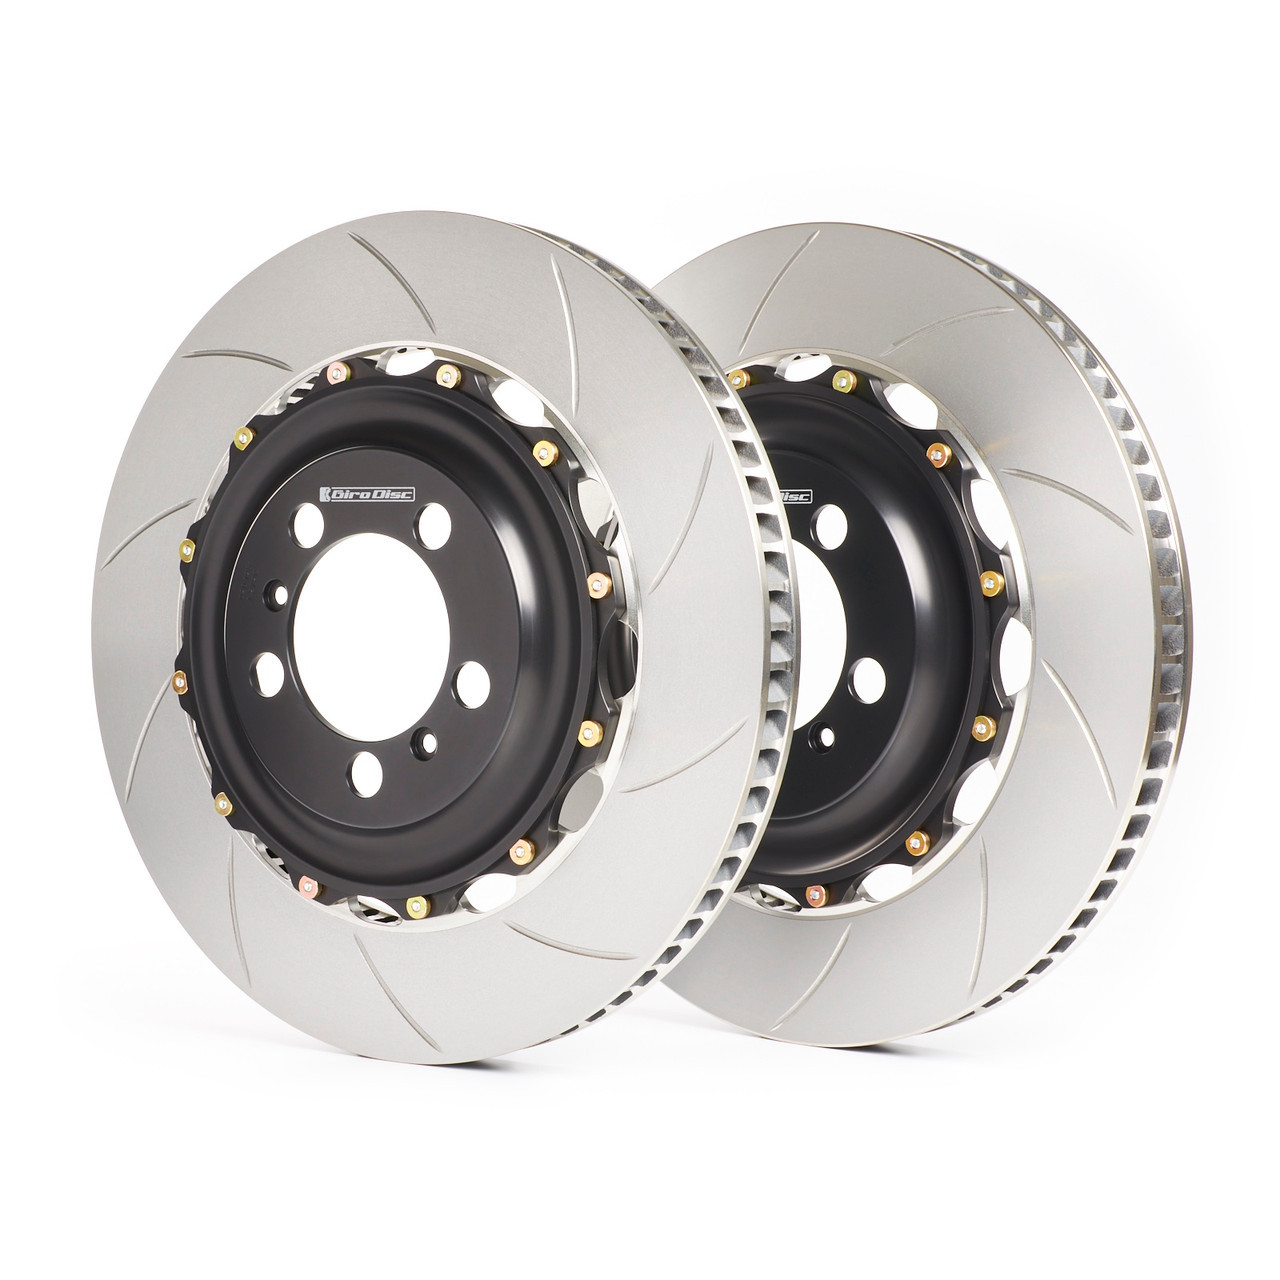 GiroDisc 2006 Audi R8 (Incl CCM) 380mm Slotted Front Rotors - A1-336